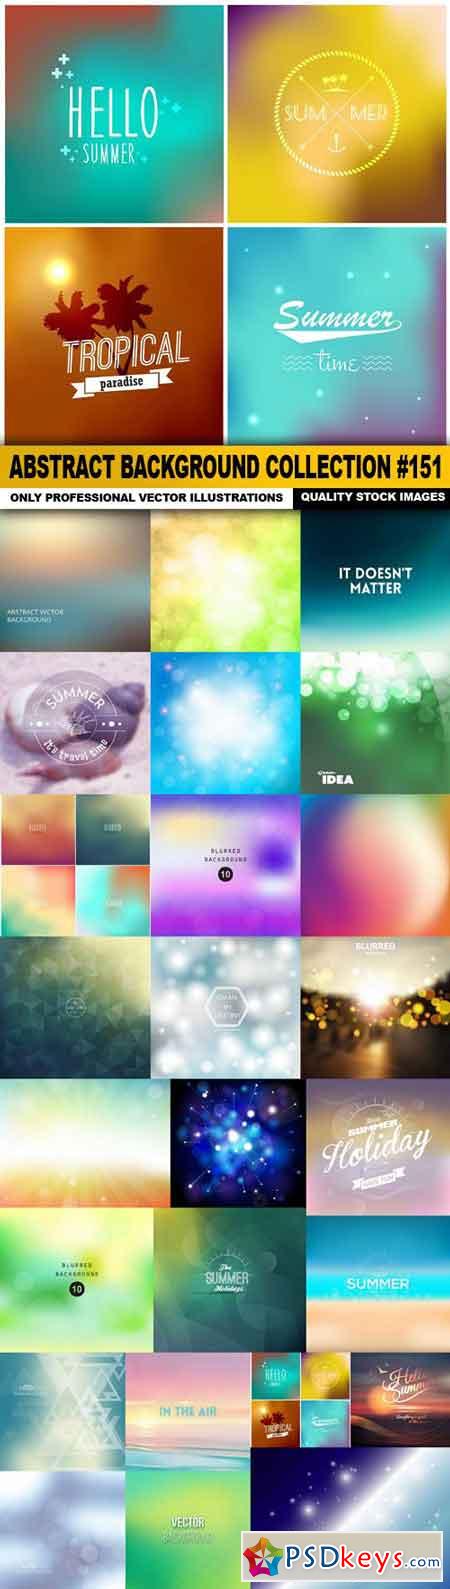 Abstract Background Collection #151 - 25 Vector